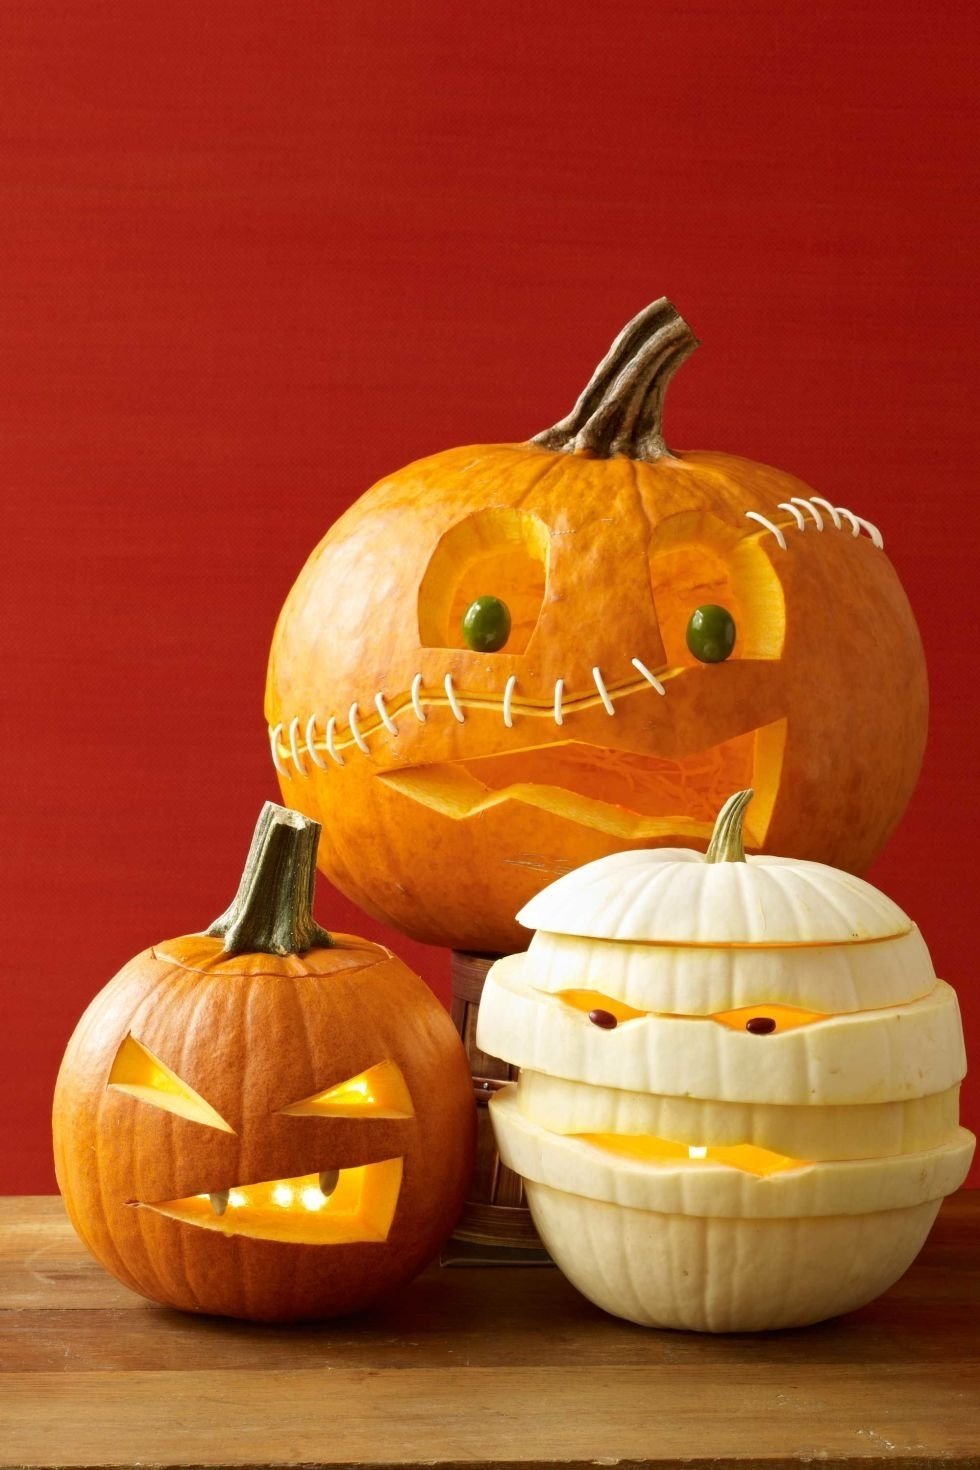 10 Amazing Creative Easy Pumpkin Carving Ideas 38 halloween pumpkin carving ideas how to carve pumpkin carvings 1 2022